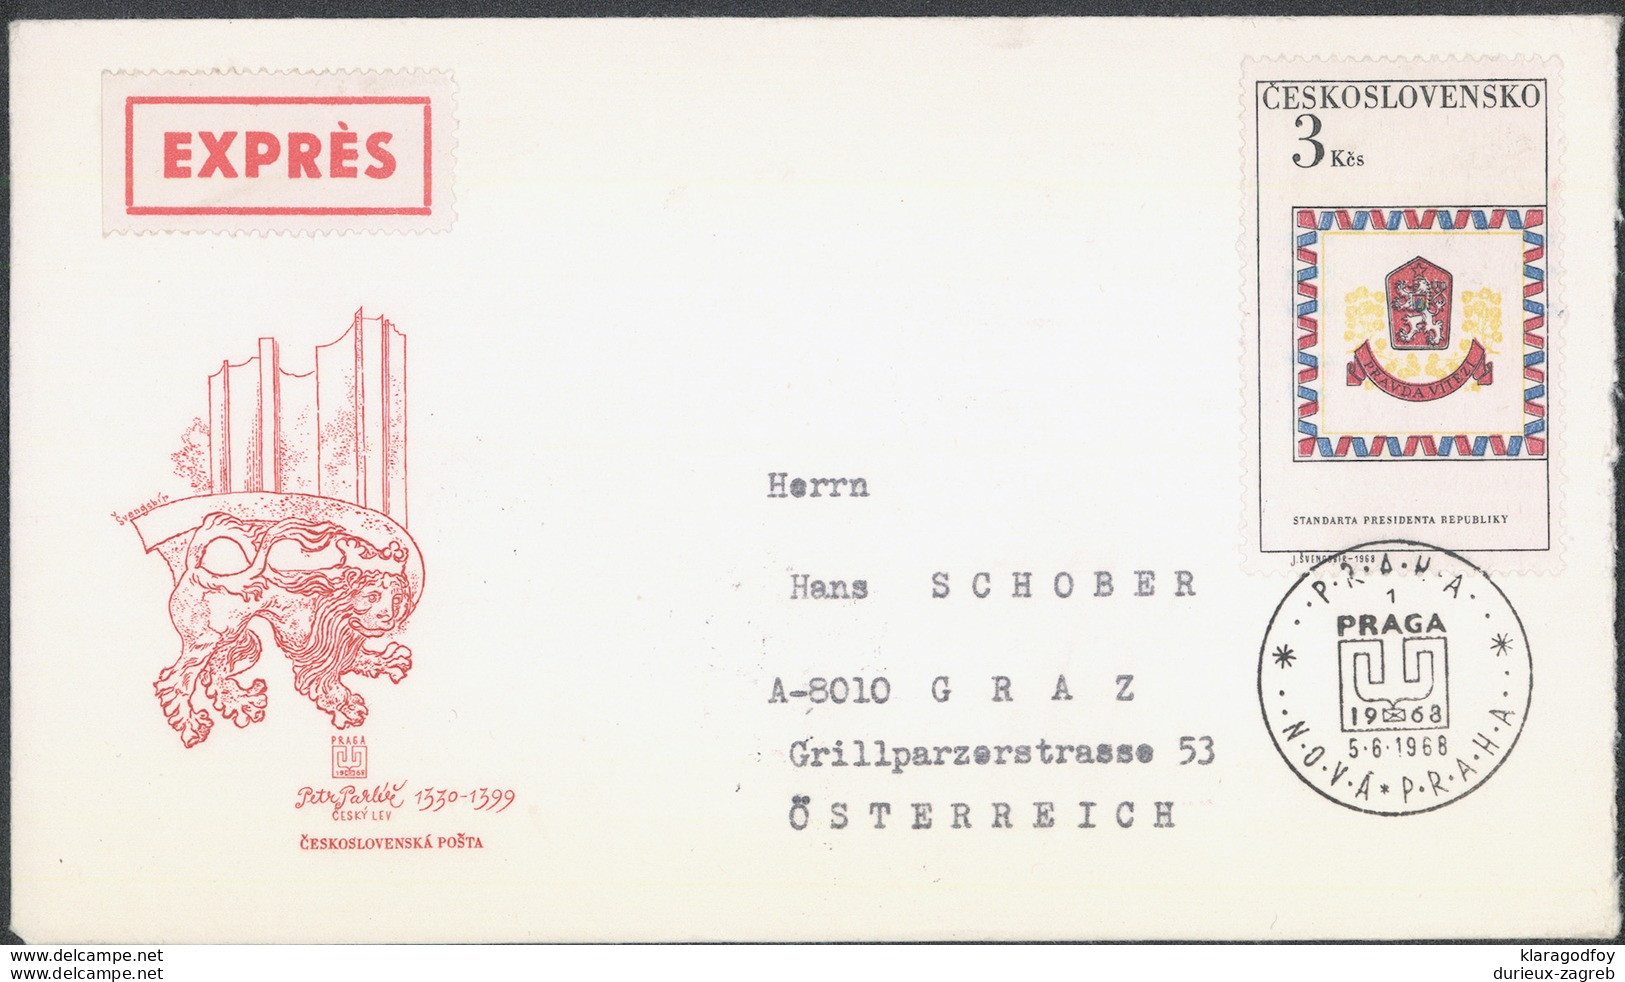 Czechoslovakia, Petr Parlé&#x159; Illustrated Letter Cover Express Travelled 1968 Karlovy Vary To Graz B170410 - Storia Postale